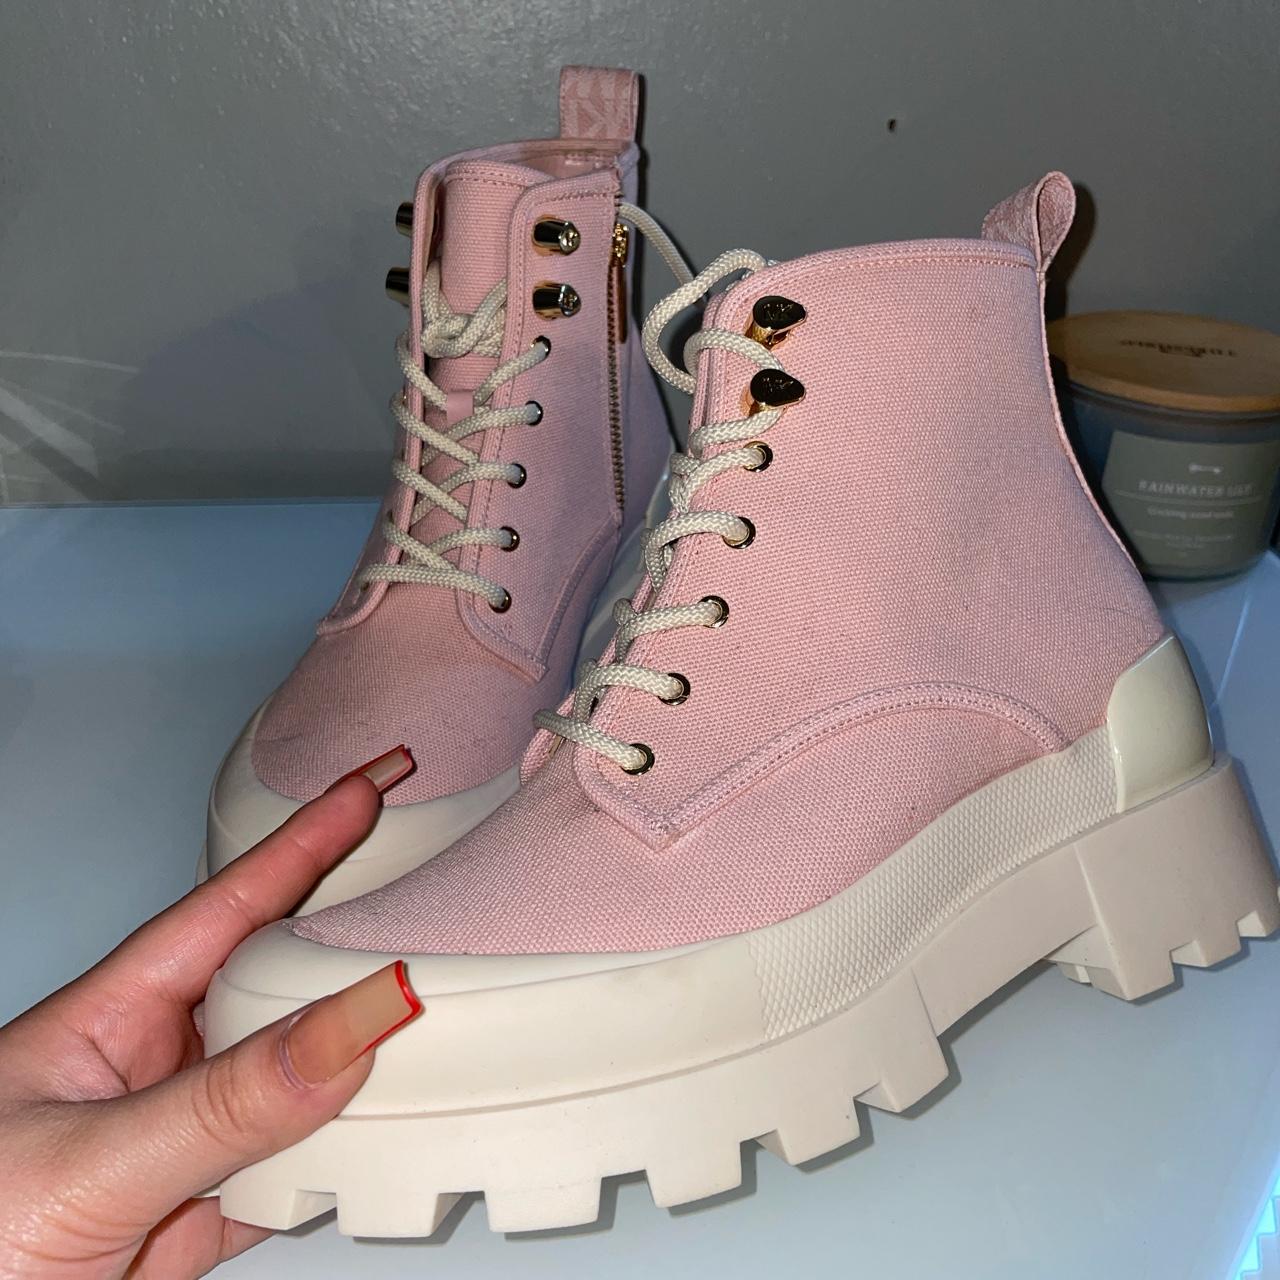 Michael Kors Women's Pink and White Boots | Depop